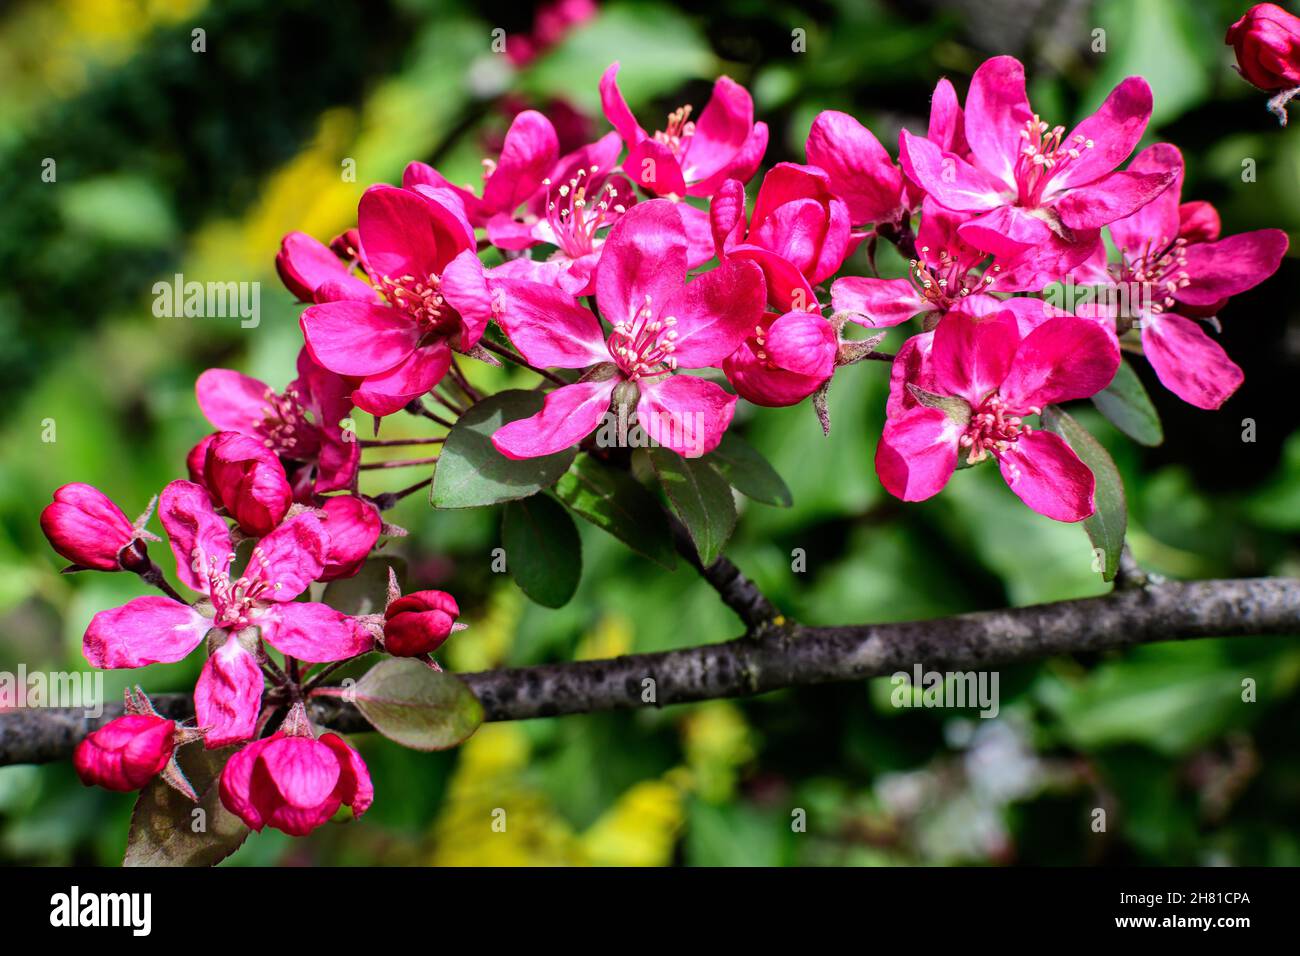 Branch with many vivid decorative red crab apple flowers and blooms in a tree in full bloom in a garden in a sunny spring day, beautiful outdoor flora Stock Photo